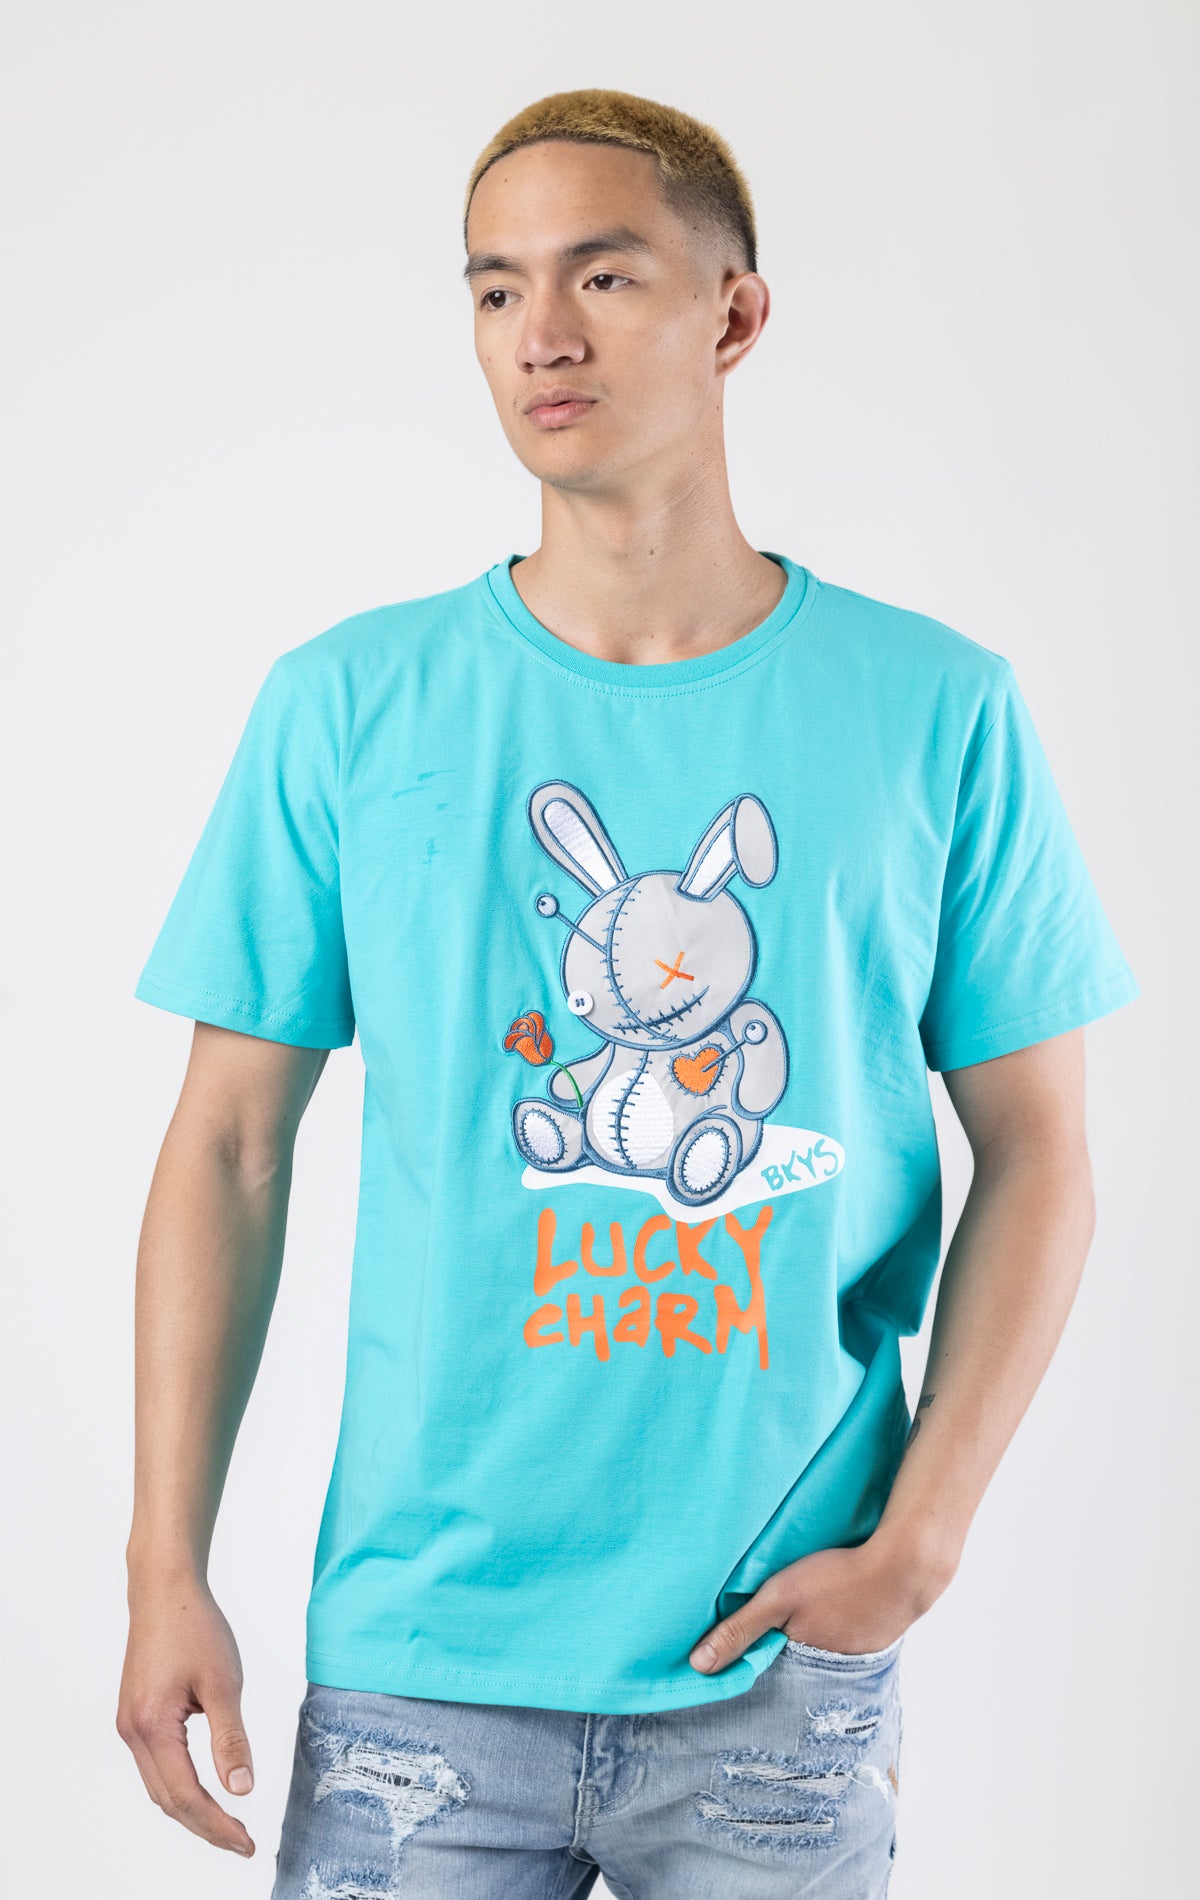 Miami blue Crewneck, short-sleeve BKYS Lucky Charm t-shirt with bunny graphic on front